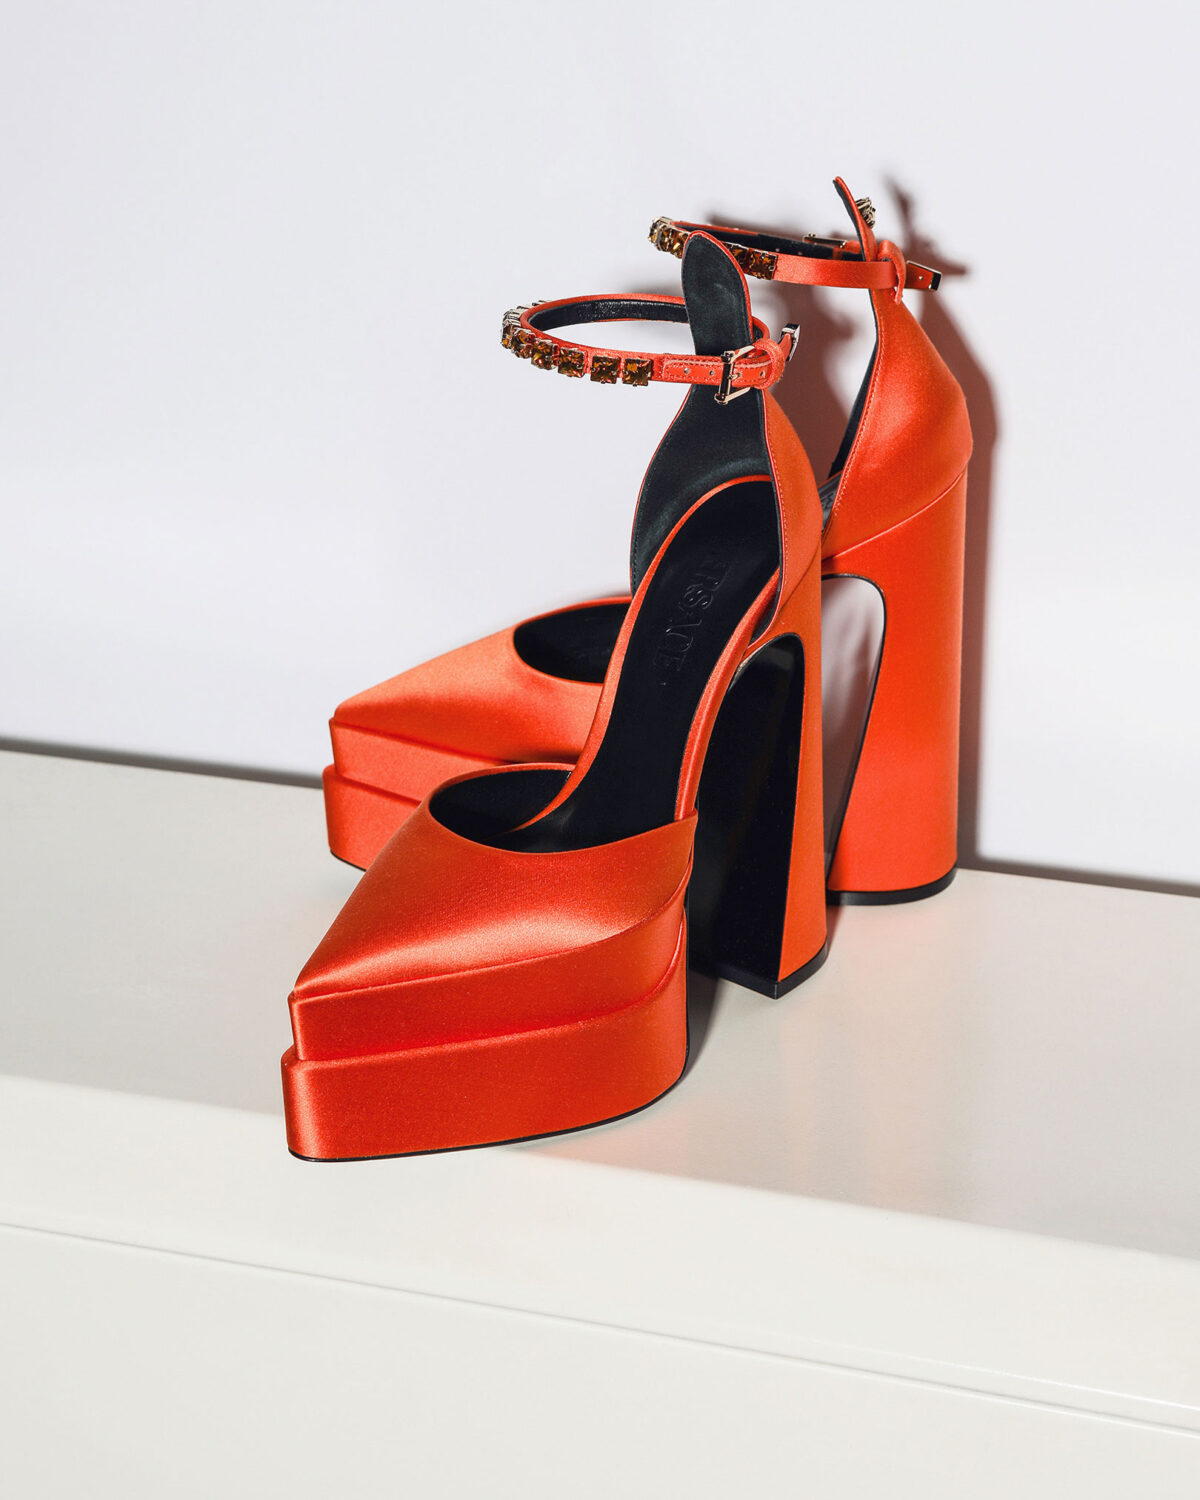 versace, shoes, heels, pumps, fashion, accessories, beauty, beauty product, productphotography, stilllife, photography, klas foerster